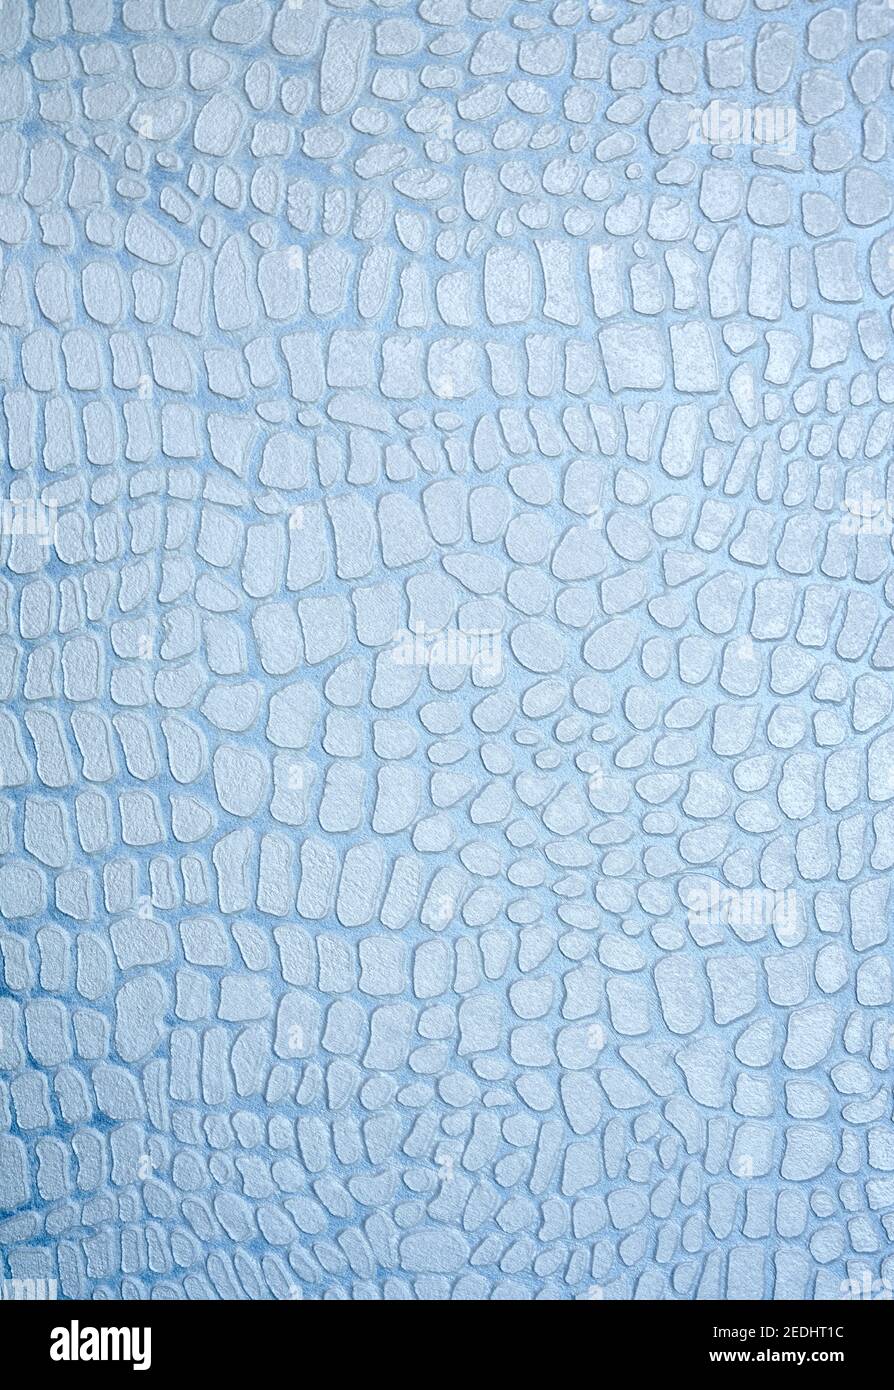 Surface decorating light blue textured plaster with the effect of reptile skin. Imitation of surface of crocodile skin on wall with decorative stucco. Stock Photo